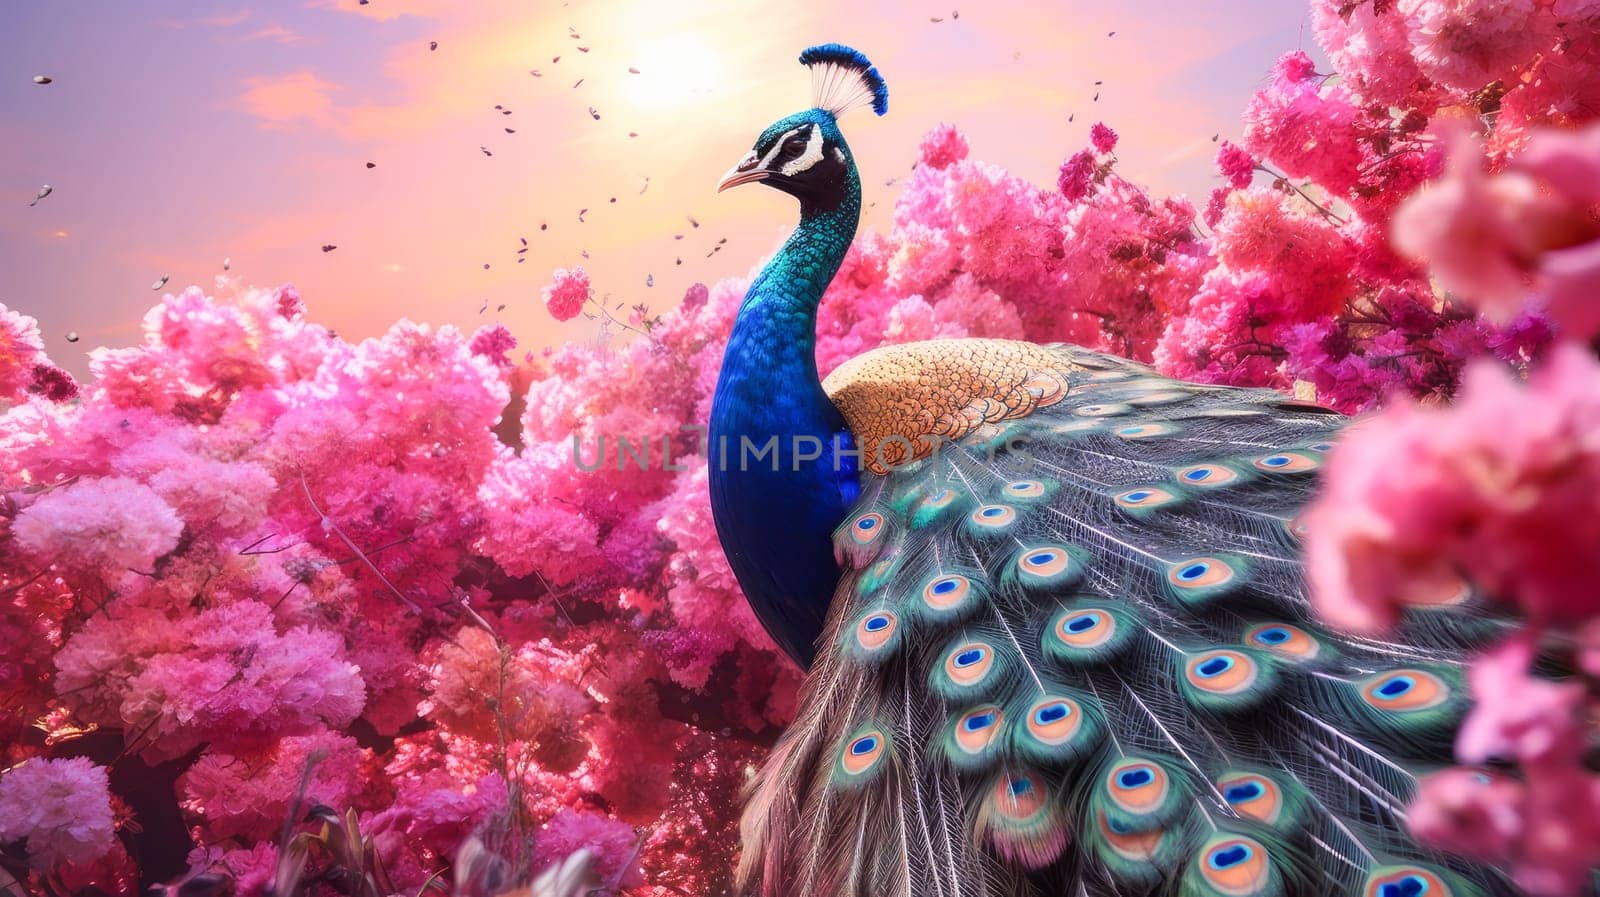 Cute, beautiful peacock in a field with flowers in nature, in sunny pink rays. Environmental protection, nature pollution problem, wild animals. Advertising travel agency, pet store, veterinary clinic, phone screensaver, beautiful pictures, puzzles